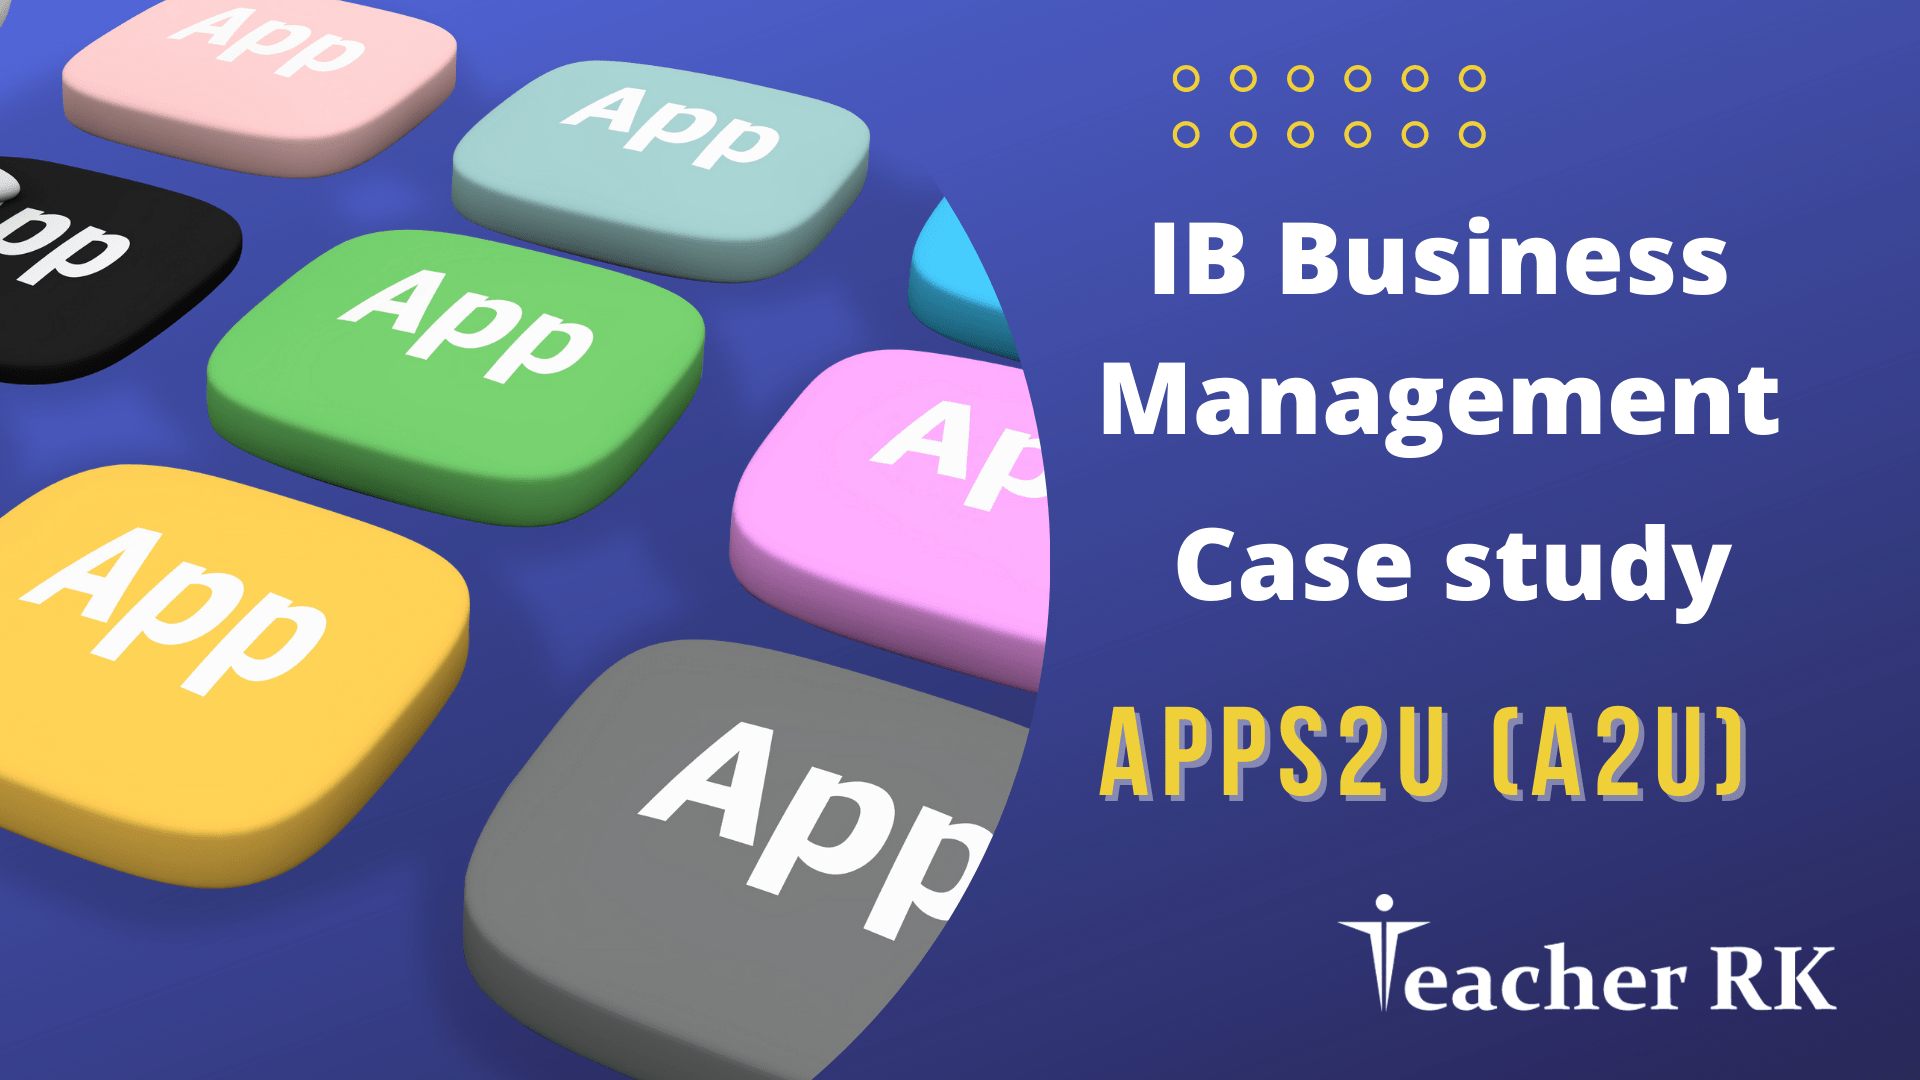 ib business case study may 2022